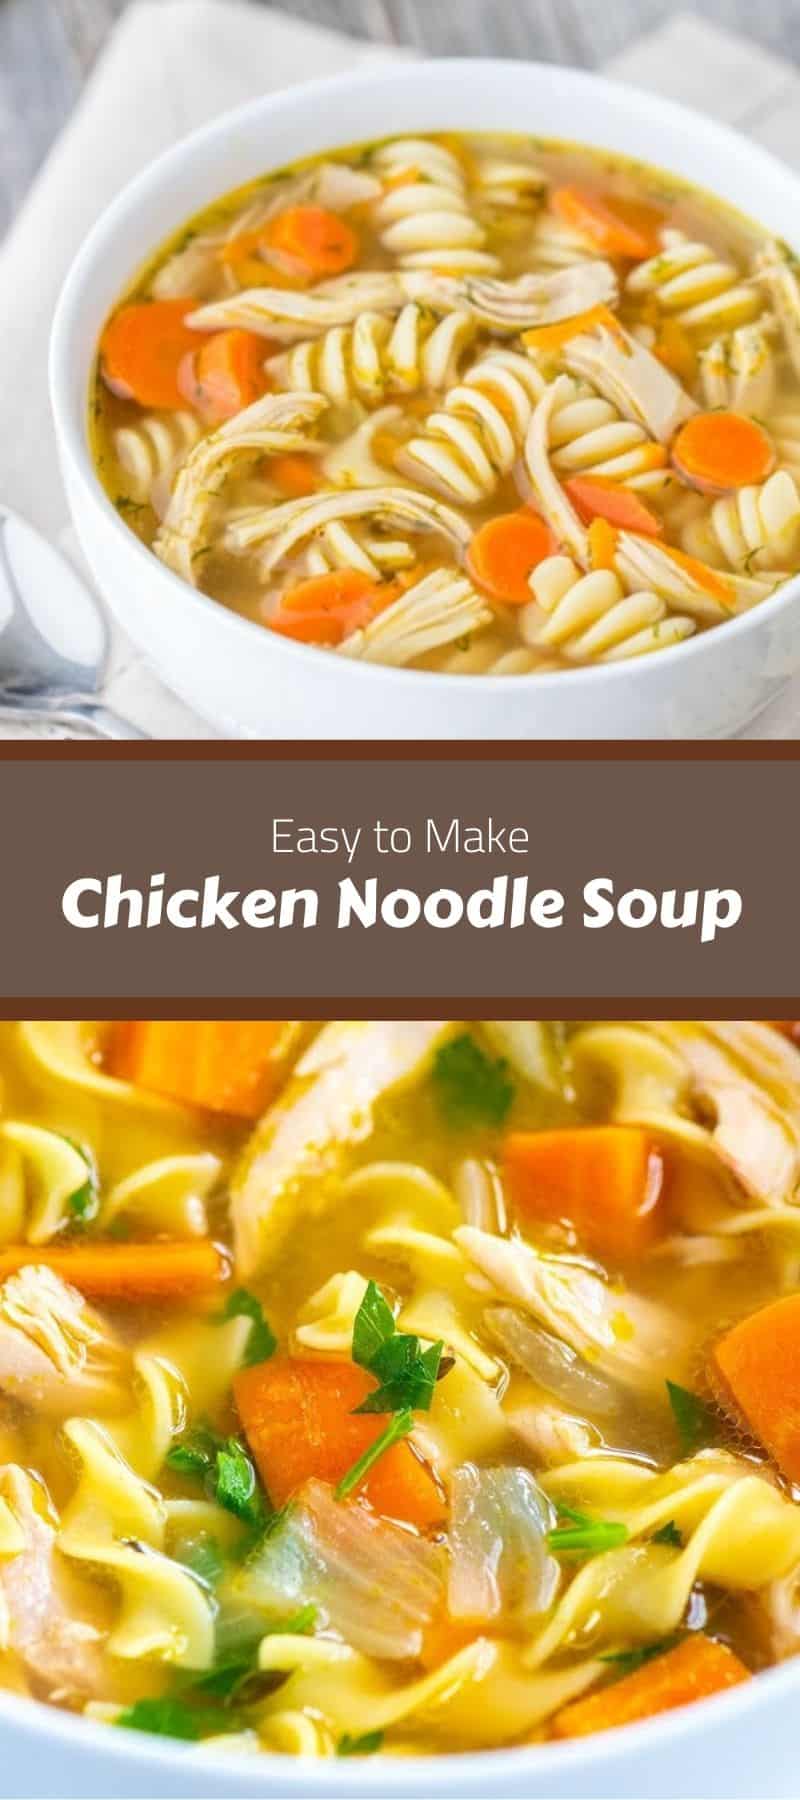 Easy Homemade Chicken Noodle Soup Recipe 2